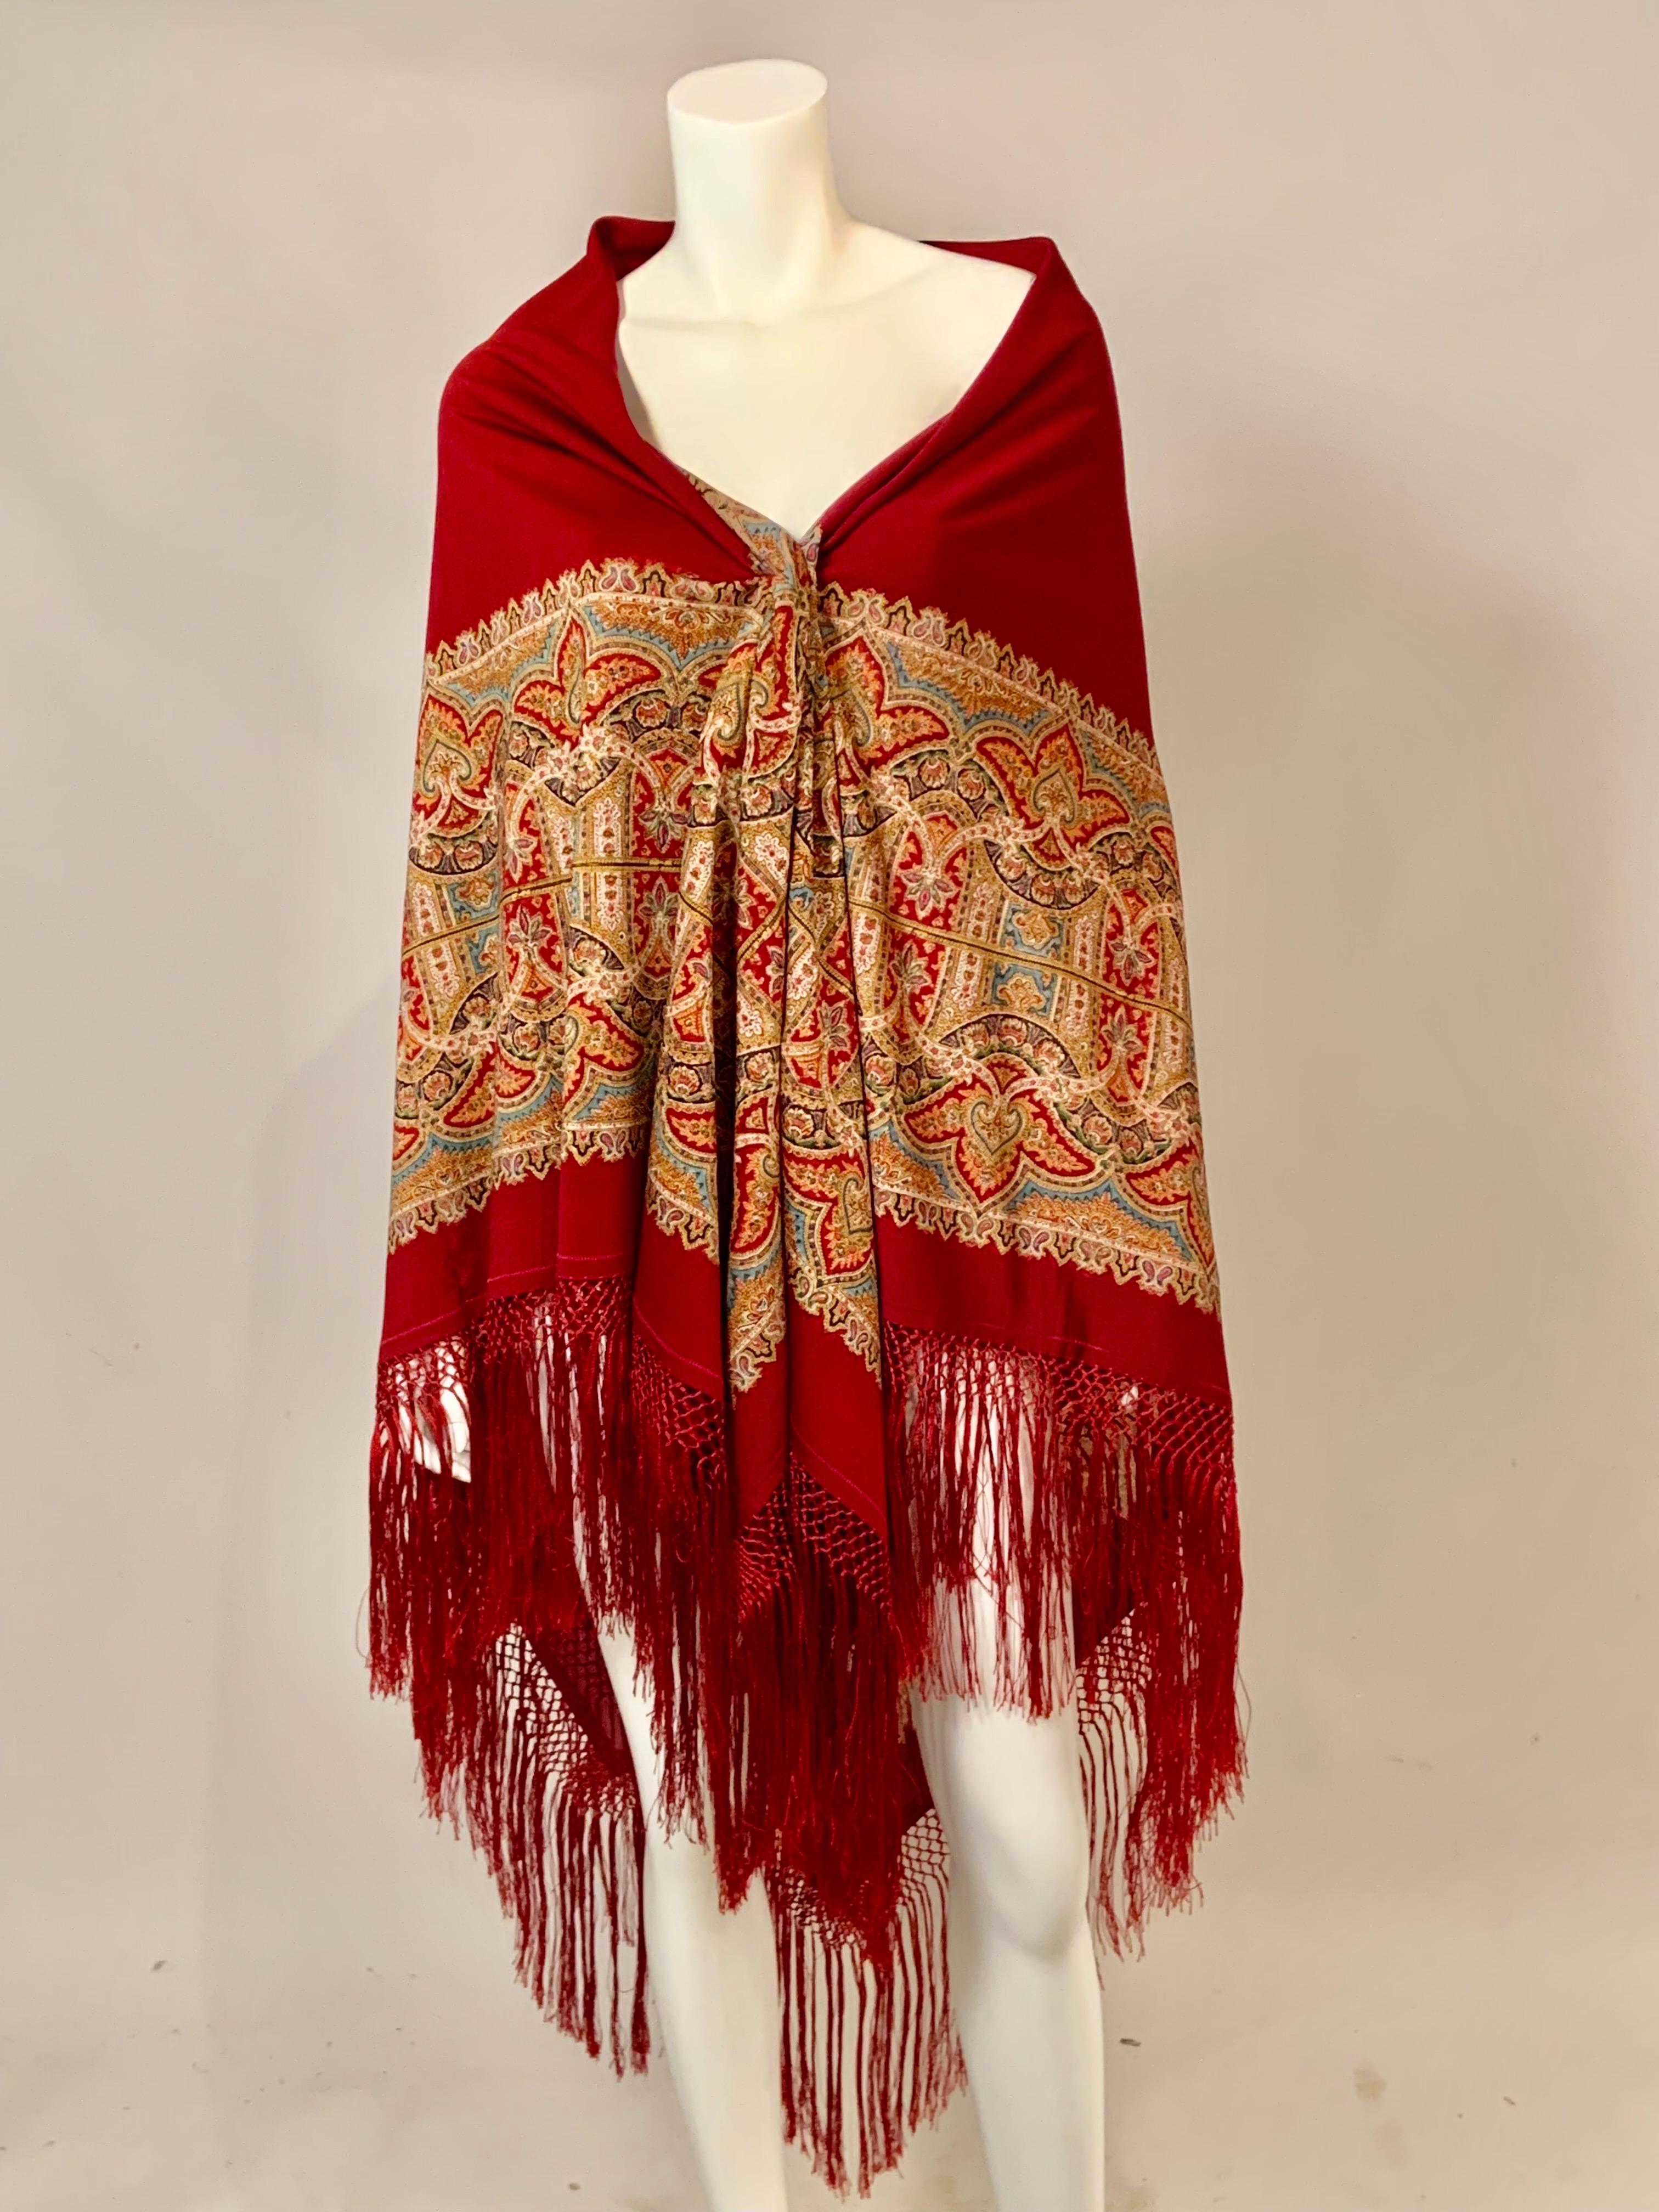 Paisley Printed Burgundy Red Shawl with Silk Fringe For Sale 5